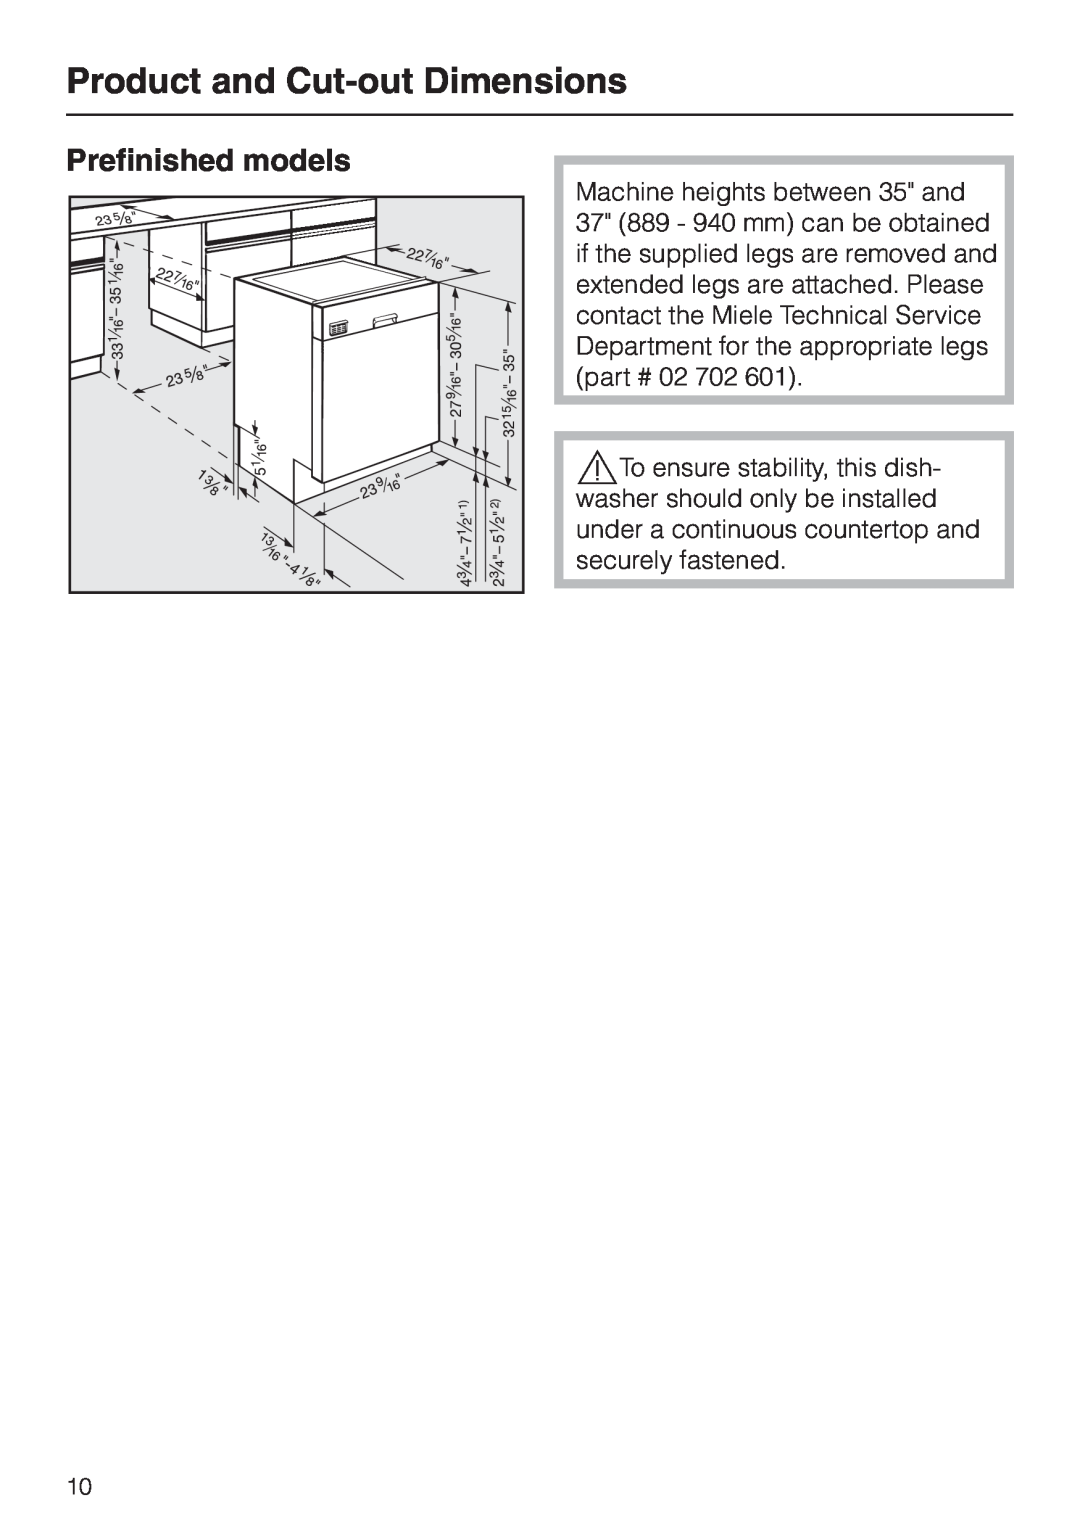 Miele HG02 installation instructions Prefinished models, Product and Cut-outDimensions 